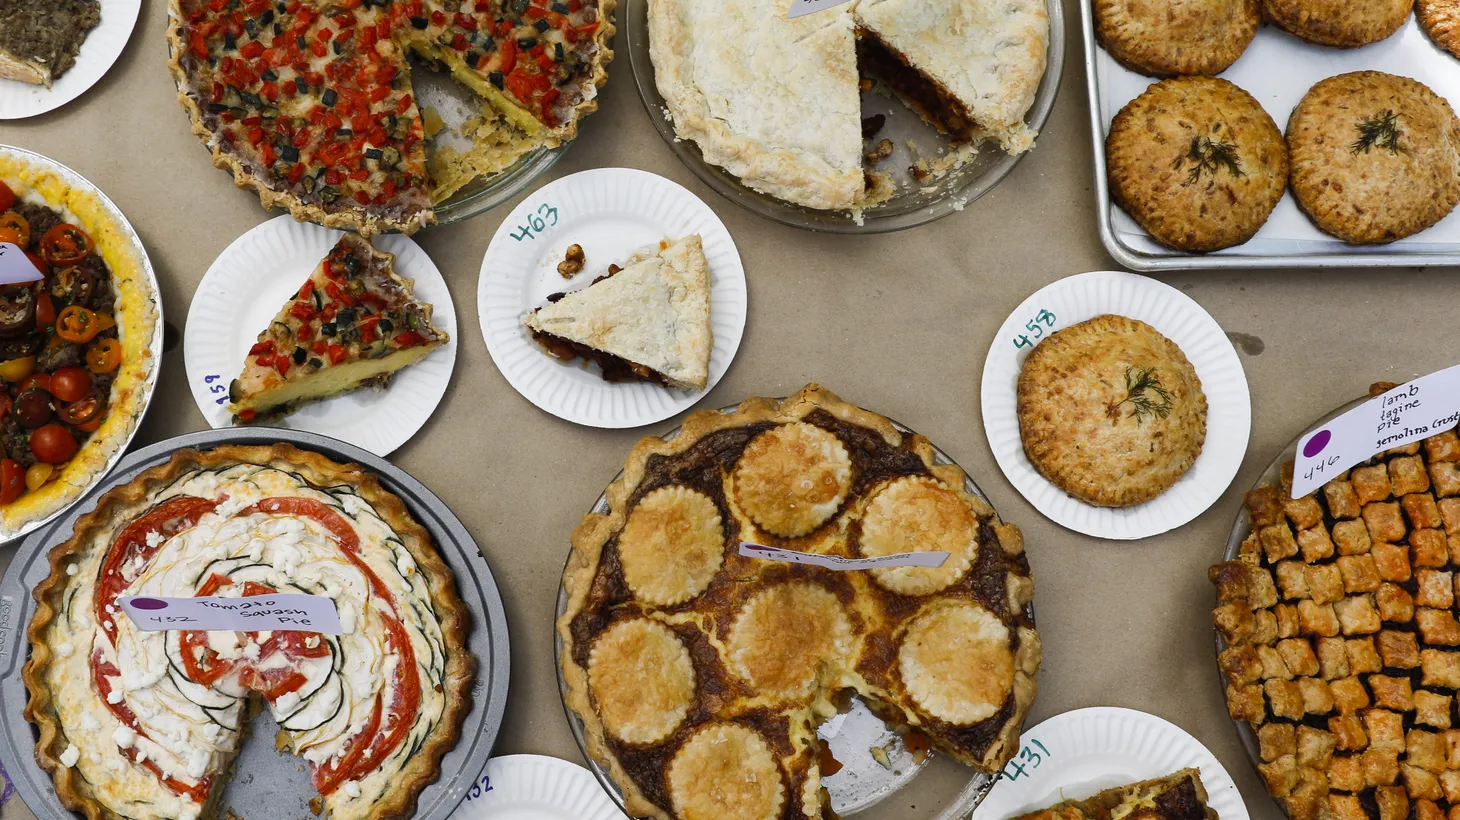 KCRW’s Good Food PieFest 2023 will take place at UCLA Royce Quad on Sunday, April 30, 2023 from 12 p.m. to 5 p.m.